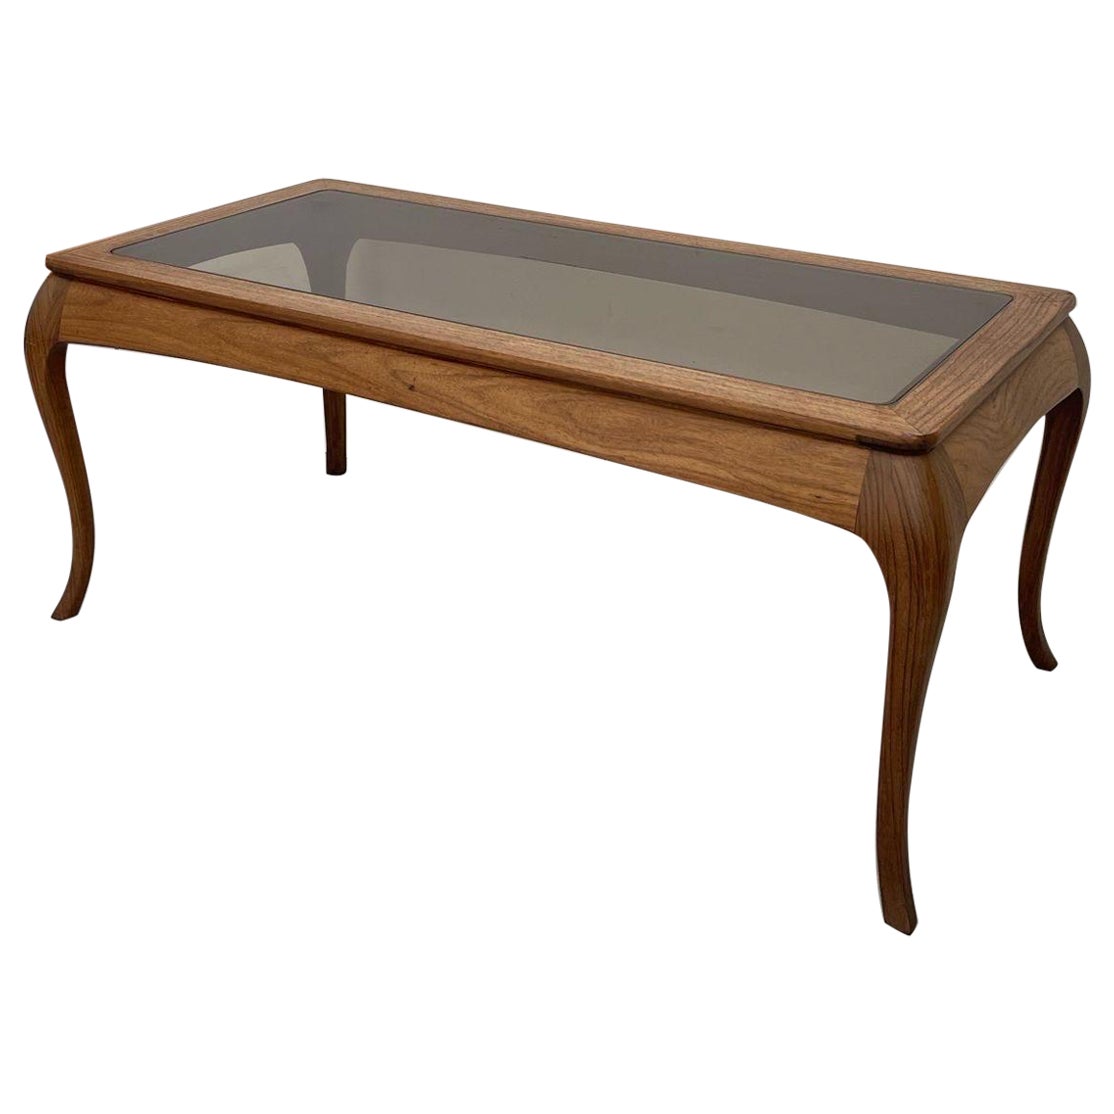 Vintage Wooden Coffee Table With Curved Legs and Smoked Glass Top.